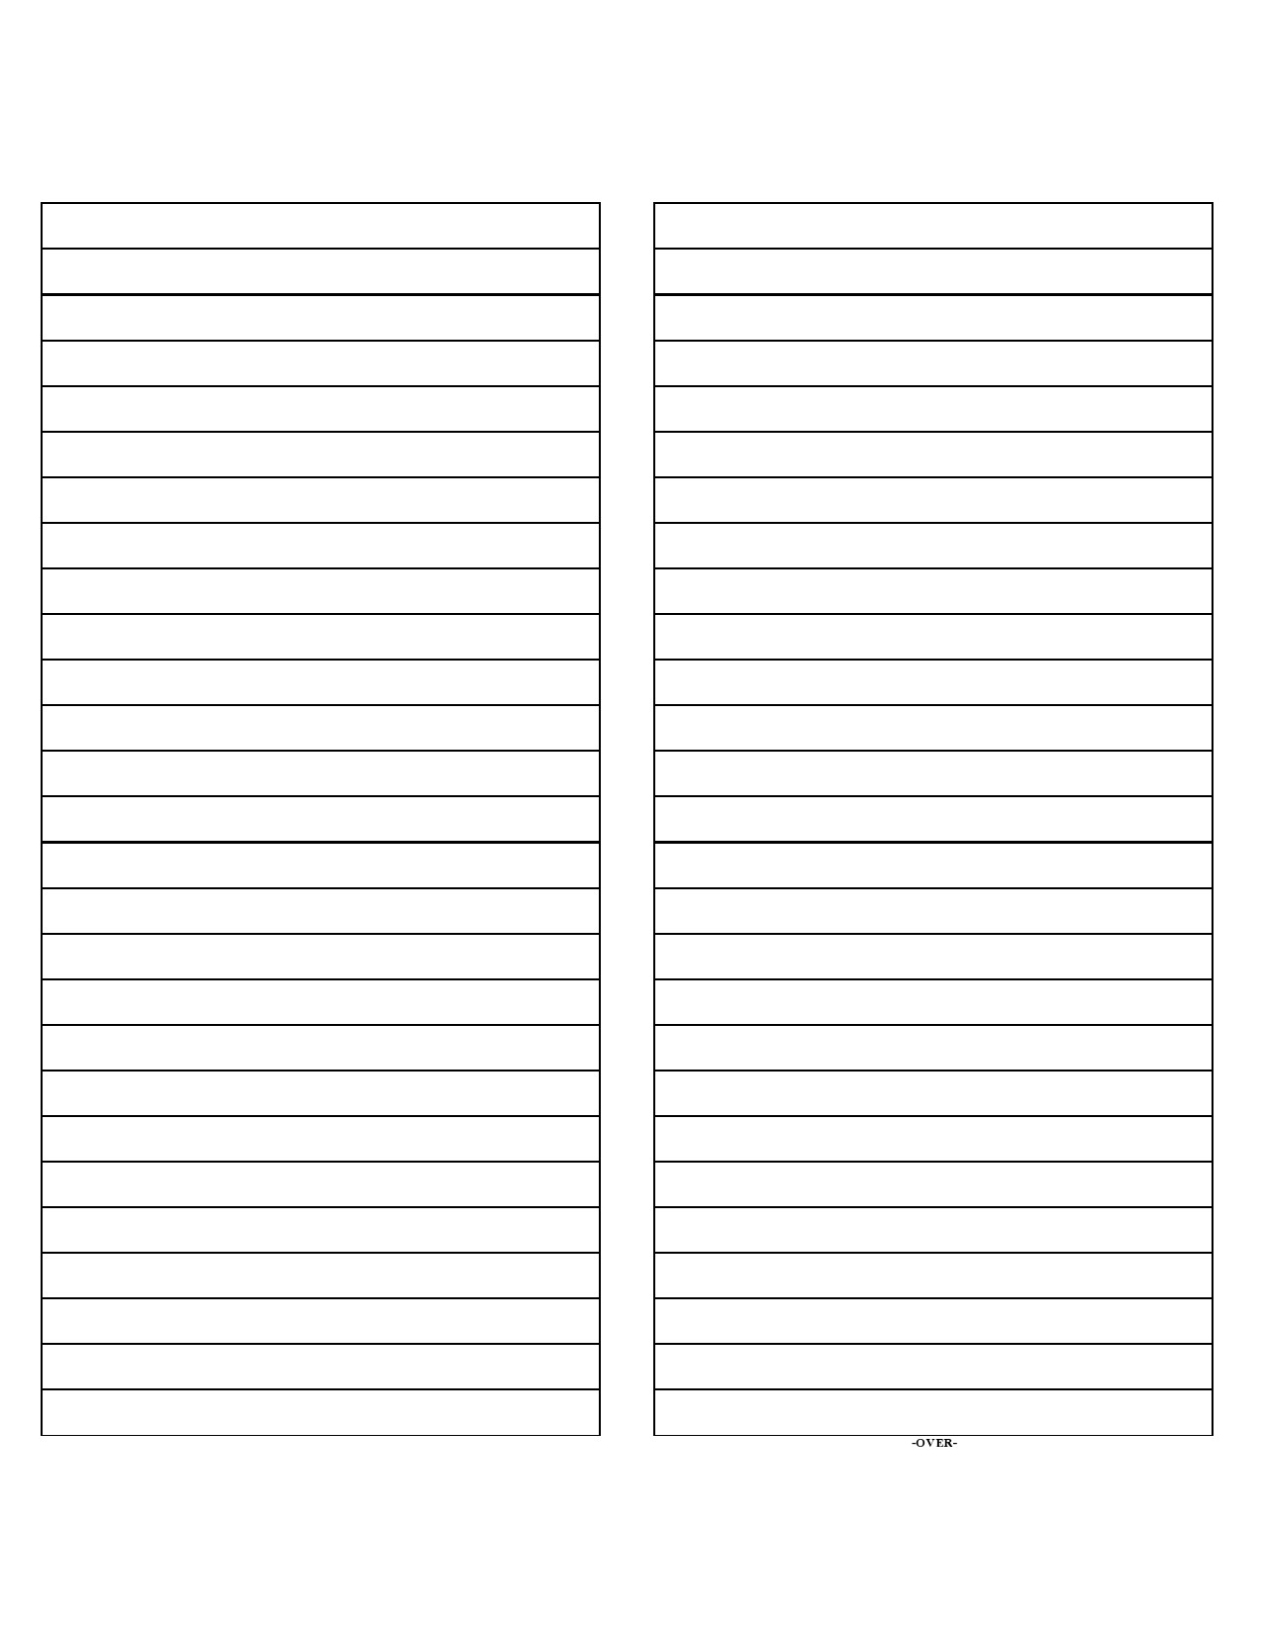 39 Simple Note Card Templates & Designs ᐅ Templatelab Pertaining To Microsoft Word Note Card Template